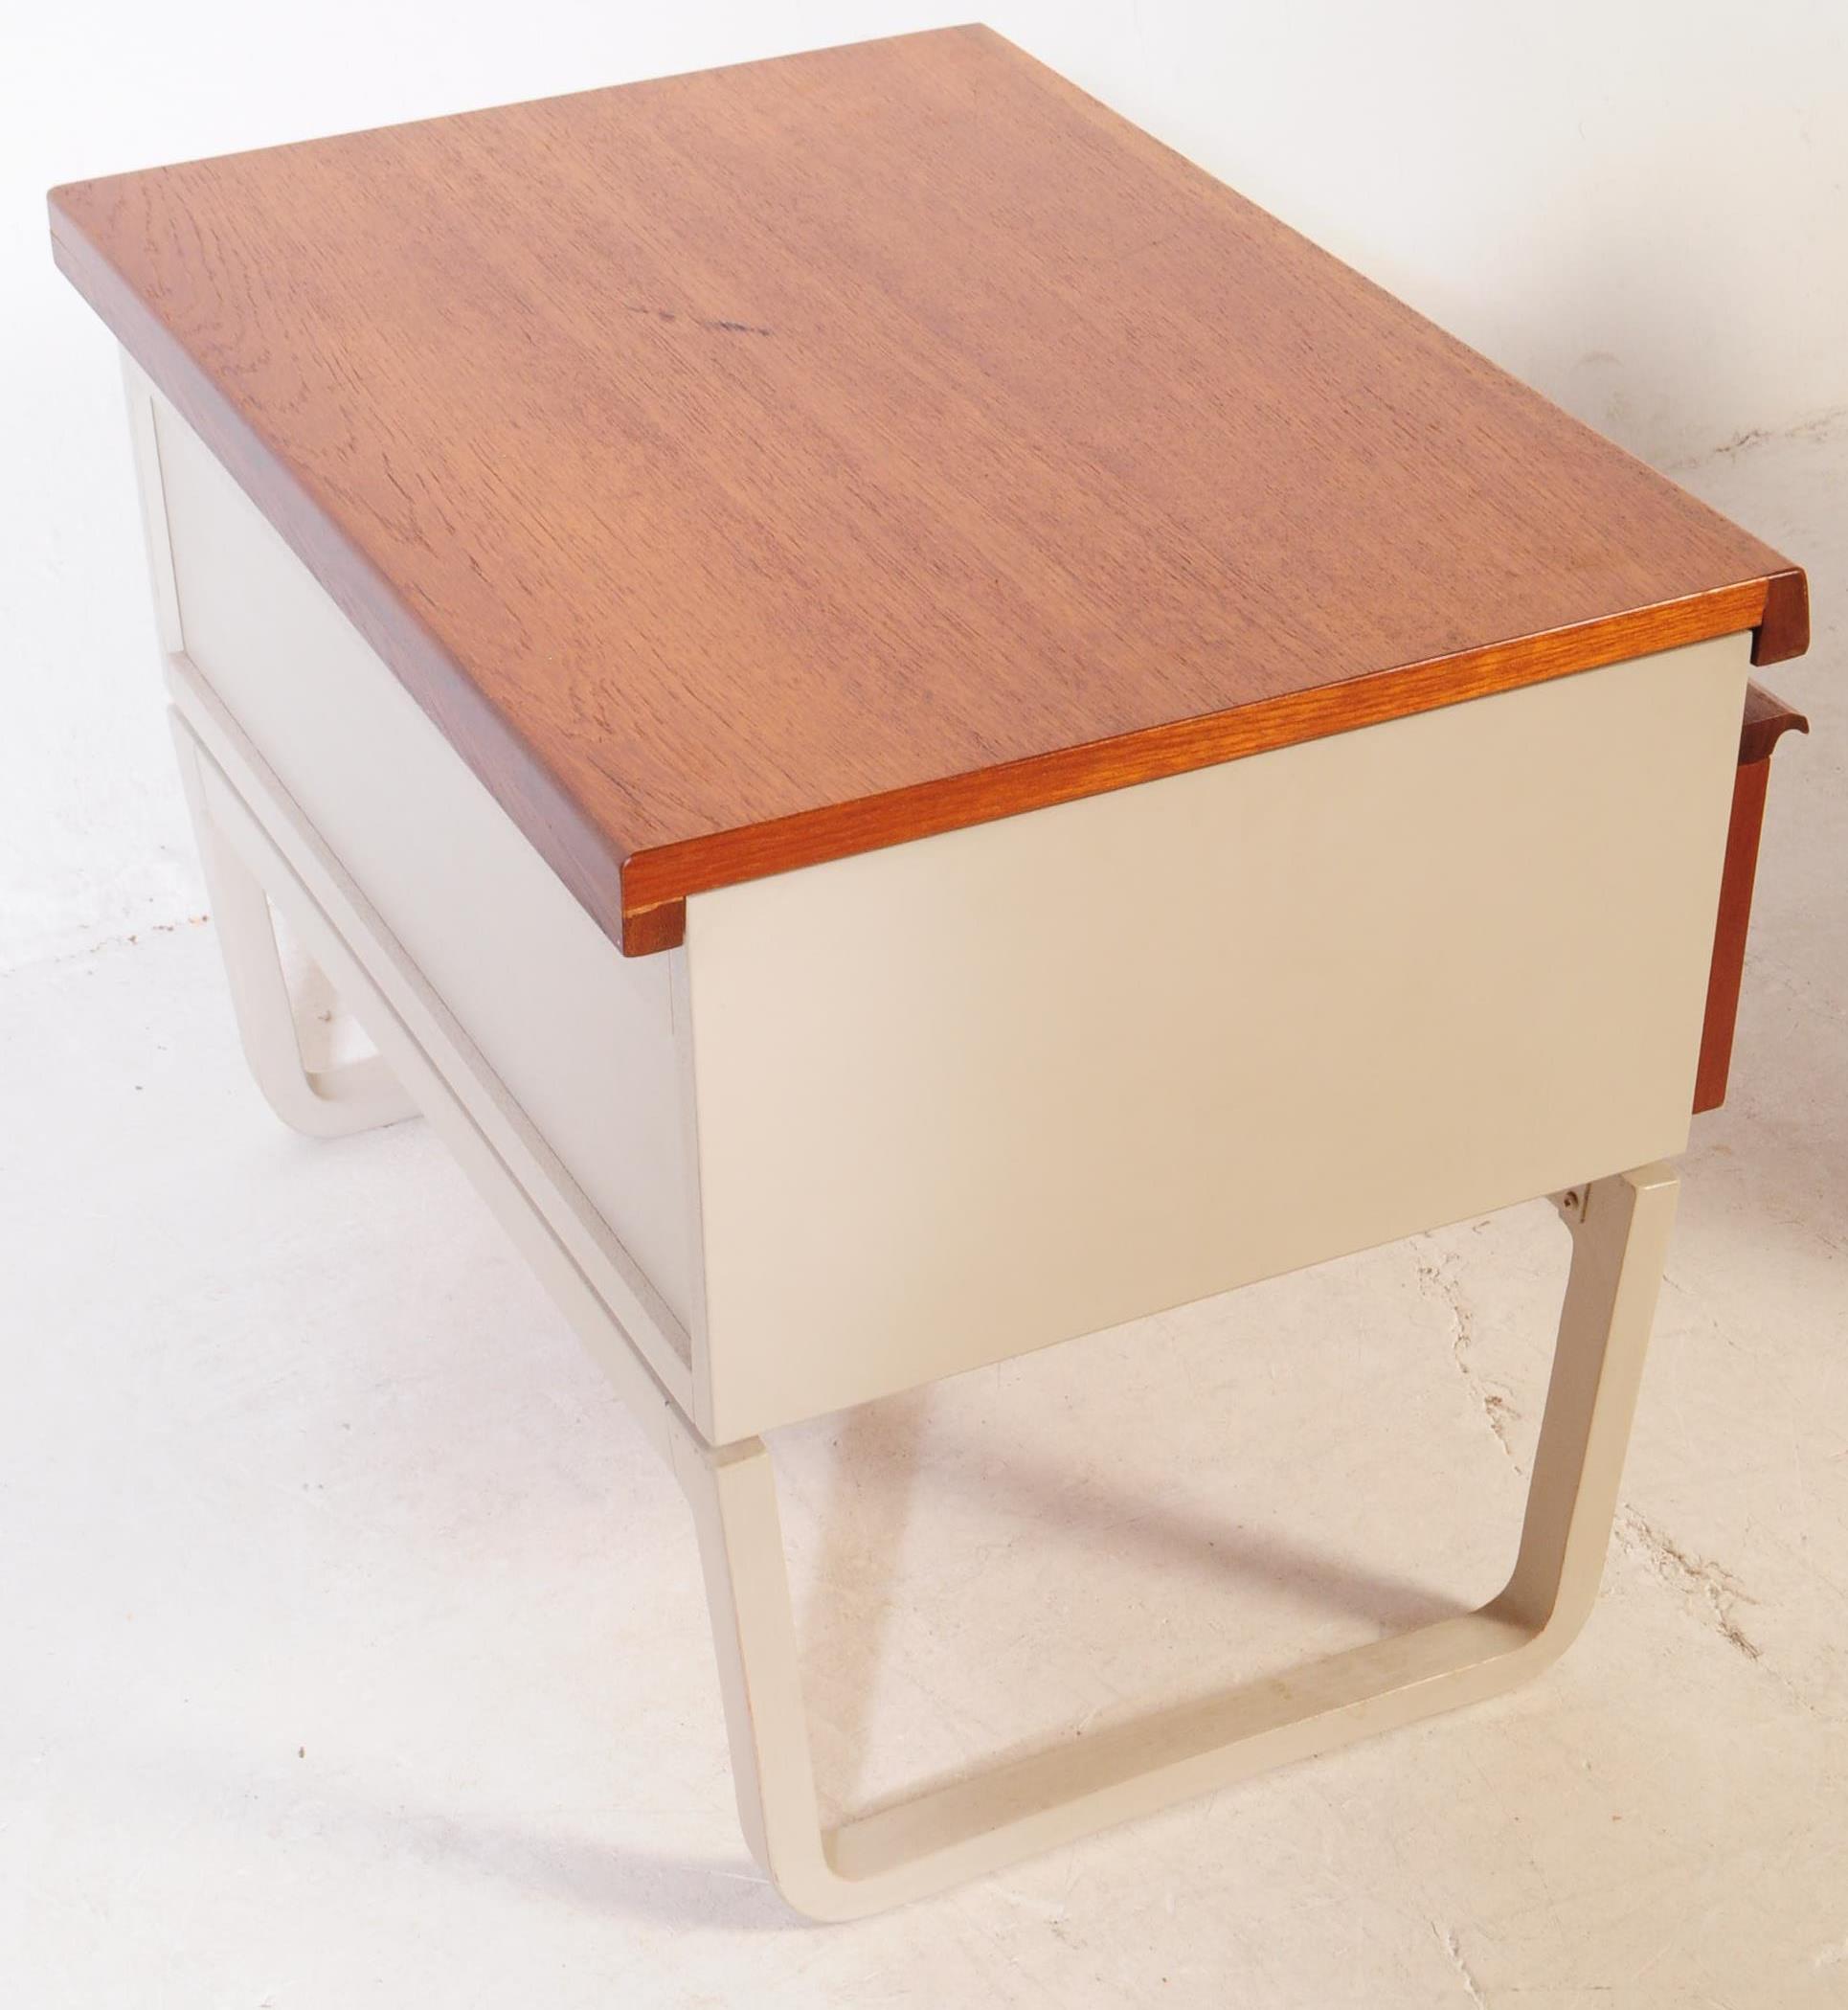 BCM BATH CABINET MAKERS 1960S BEDSIDE TABLES - Image 6 of 6